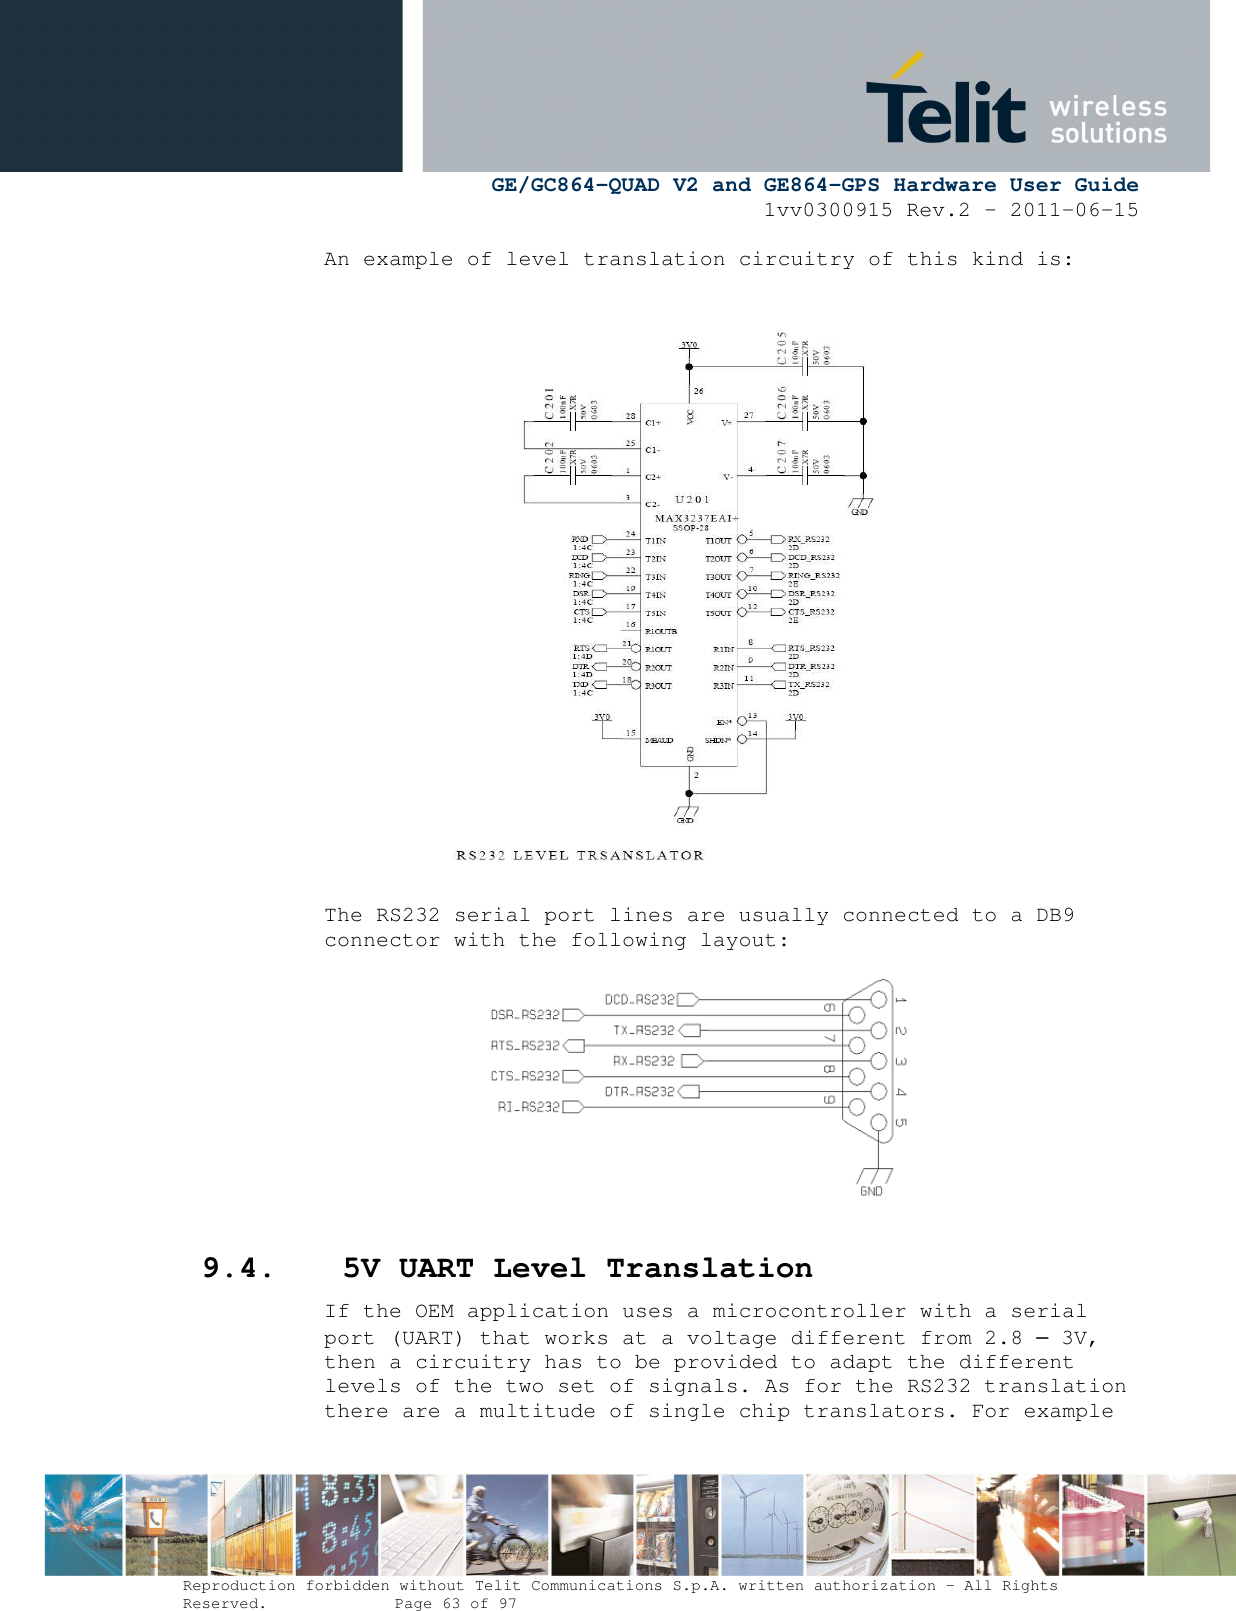      GE/GC864-QUAD V2 and GE864-GPS Hardware User Guide 1vv0300915 Rev.2 – 2011-06-15  Reproduction forbidden without Telit Communications S.p.A. written authorization - All Rights Reserved.    Page 63 of 97  An example of level translation circuitry of this kind is:  The RS232 serial port lines are usually connected to a DB9 connector with the following layout:  9.4. 5V UART Level Translation If the OEM application uses a microcontroller with a serial port (UART) that works at a voltage different from 2.8 – 3V, then a circuitry has to be provided to adapt the different levels of the two set of signals. As for the RS232 translation there are a multitude of single chip translators. For example 